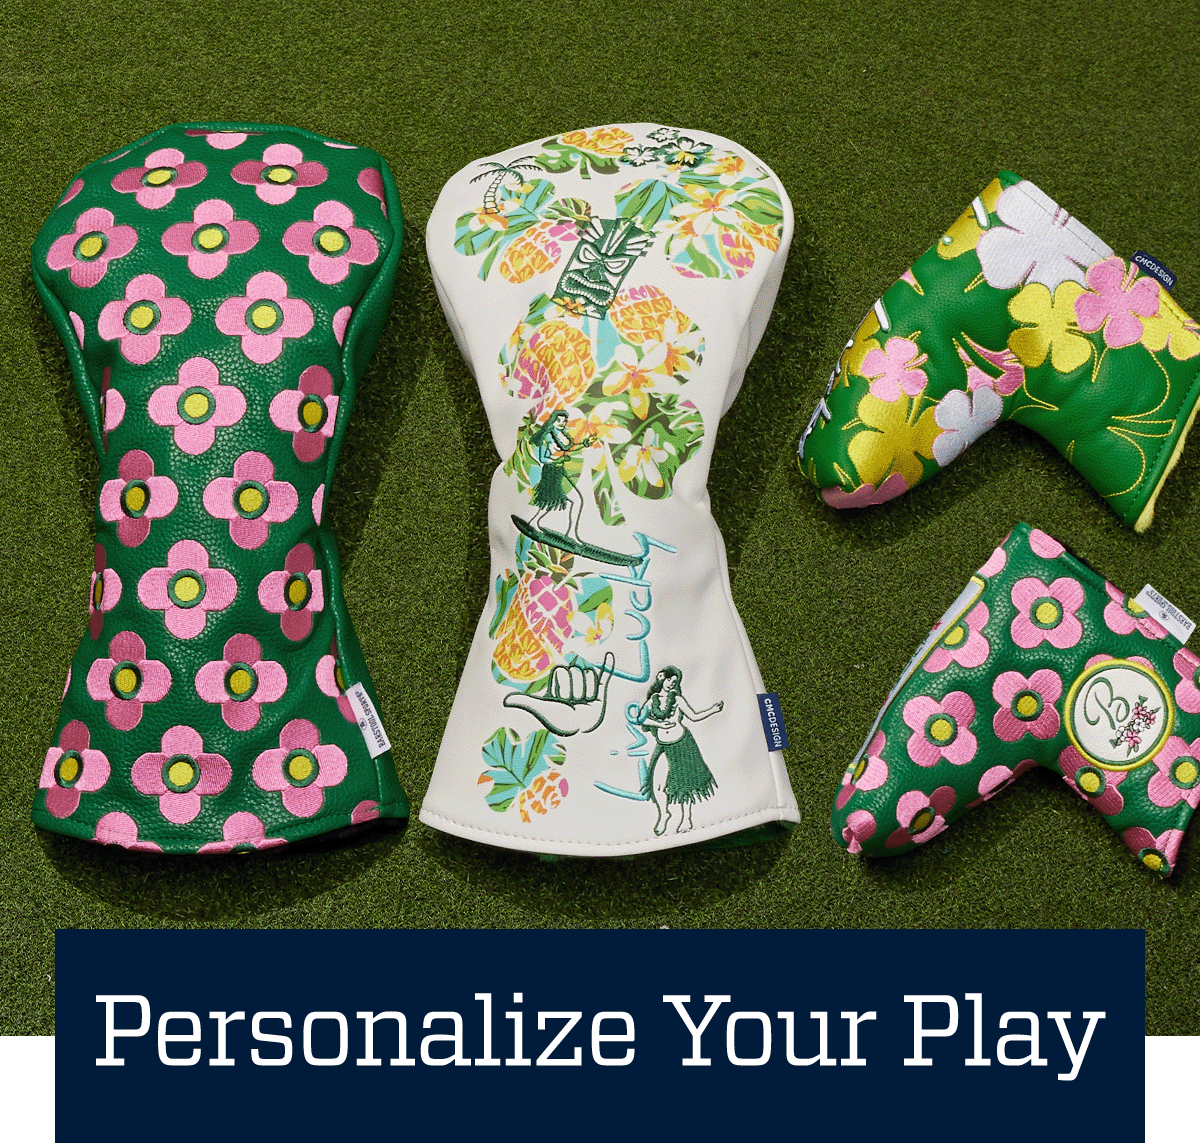  Personalize your play.